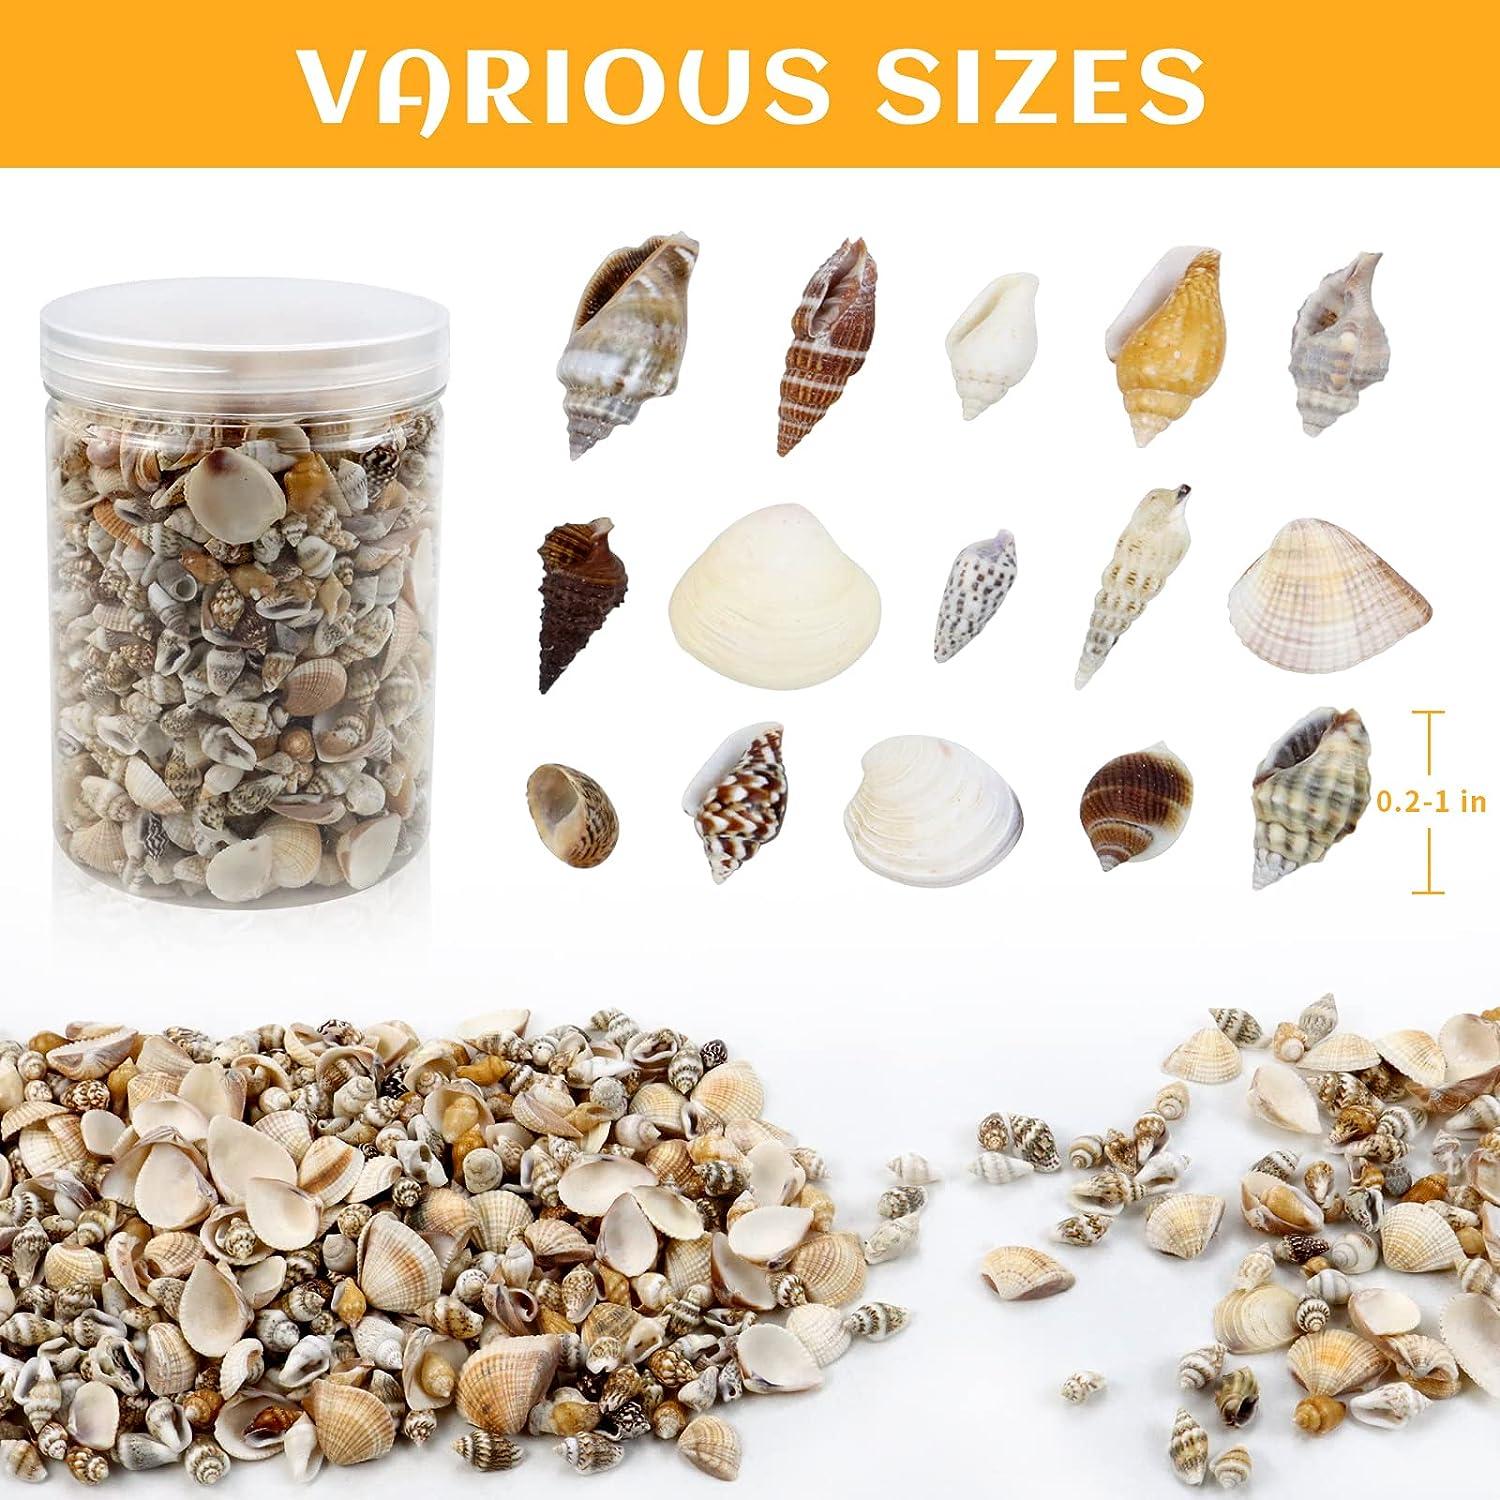 Weoxpr 2000 Pcs Tiny Sea Shells for Crafting,Mixed Ocean Beach Mini  Seashells Bulk for Home Decorations,Beach Theme Party, Small Shells for  Craft